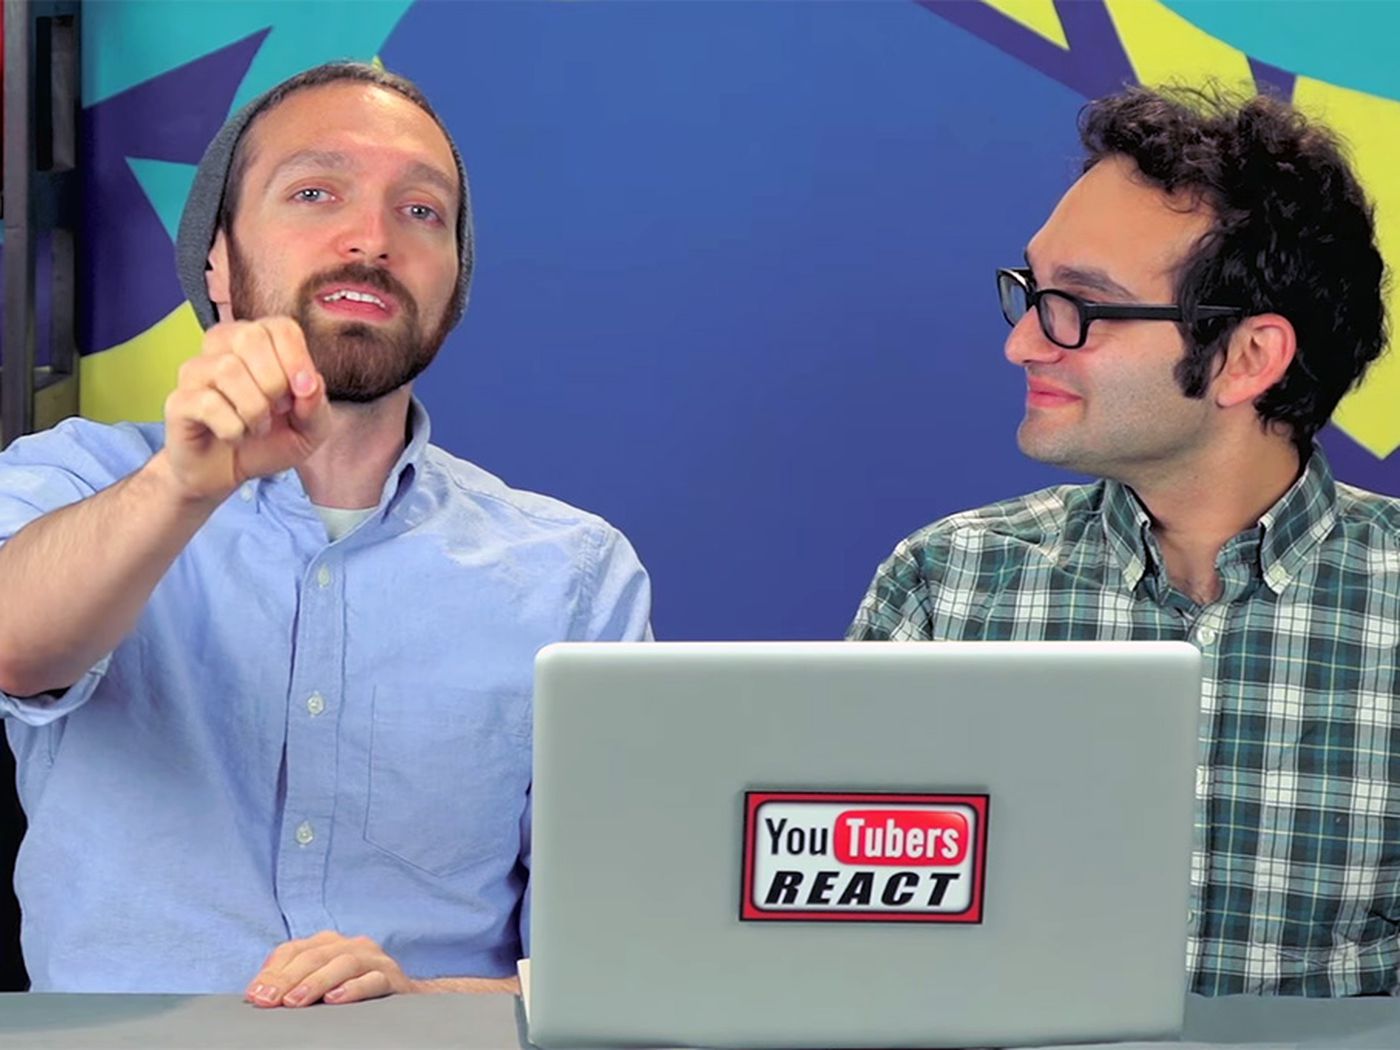 “When the Fine Brothers announced they were going to trademark the term "react" in relation to YouTube videos.” — europorn